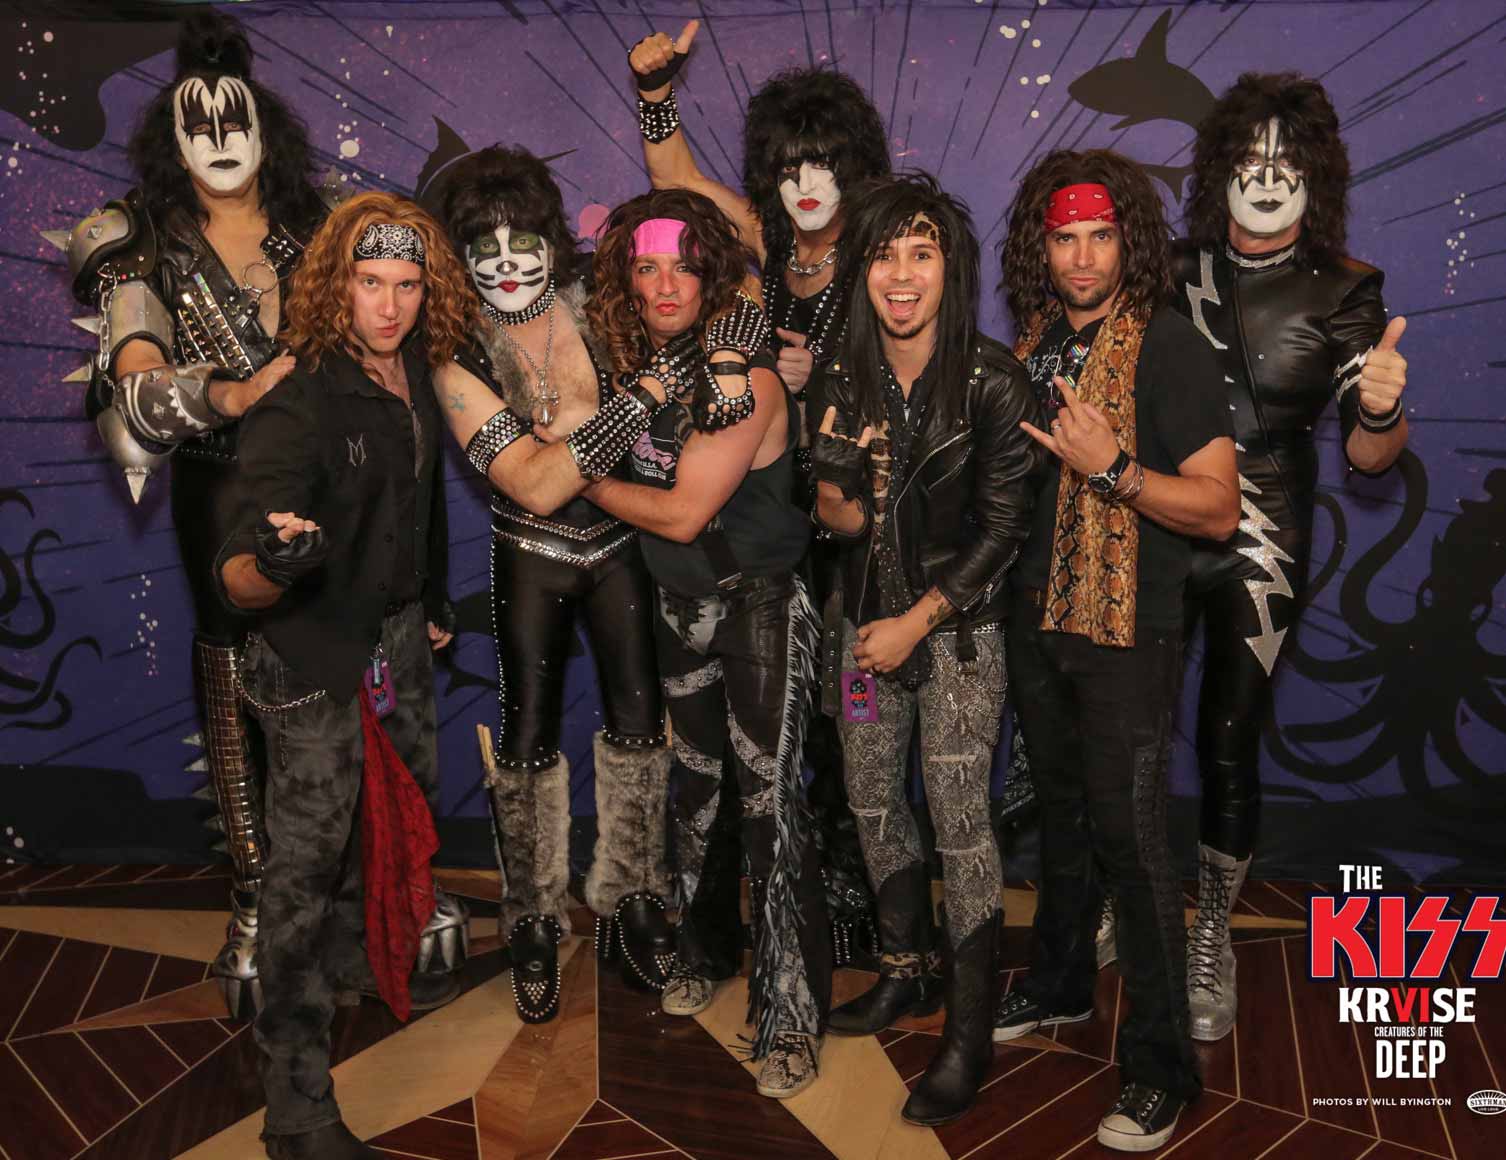 Hanging out with KISS aboard the KISS Kruise VI!